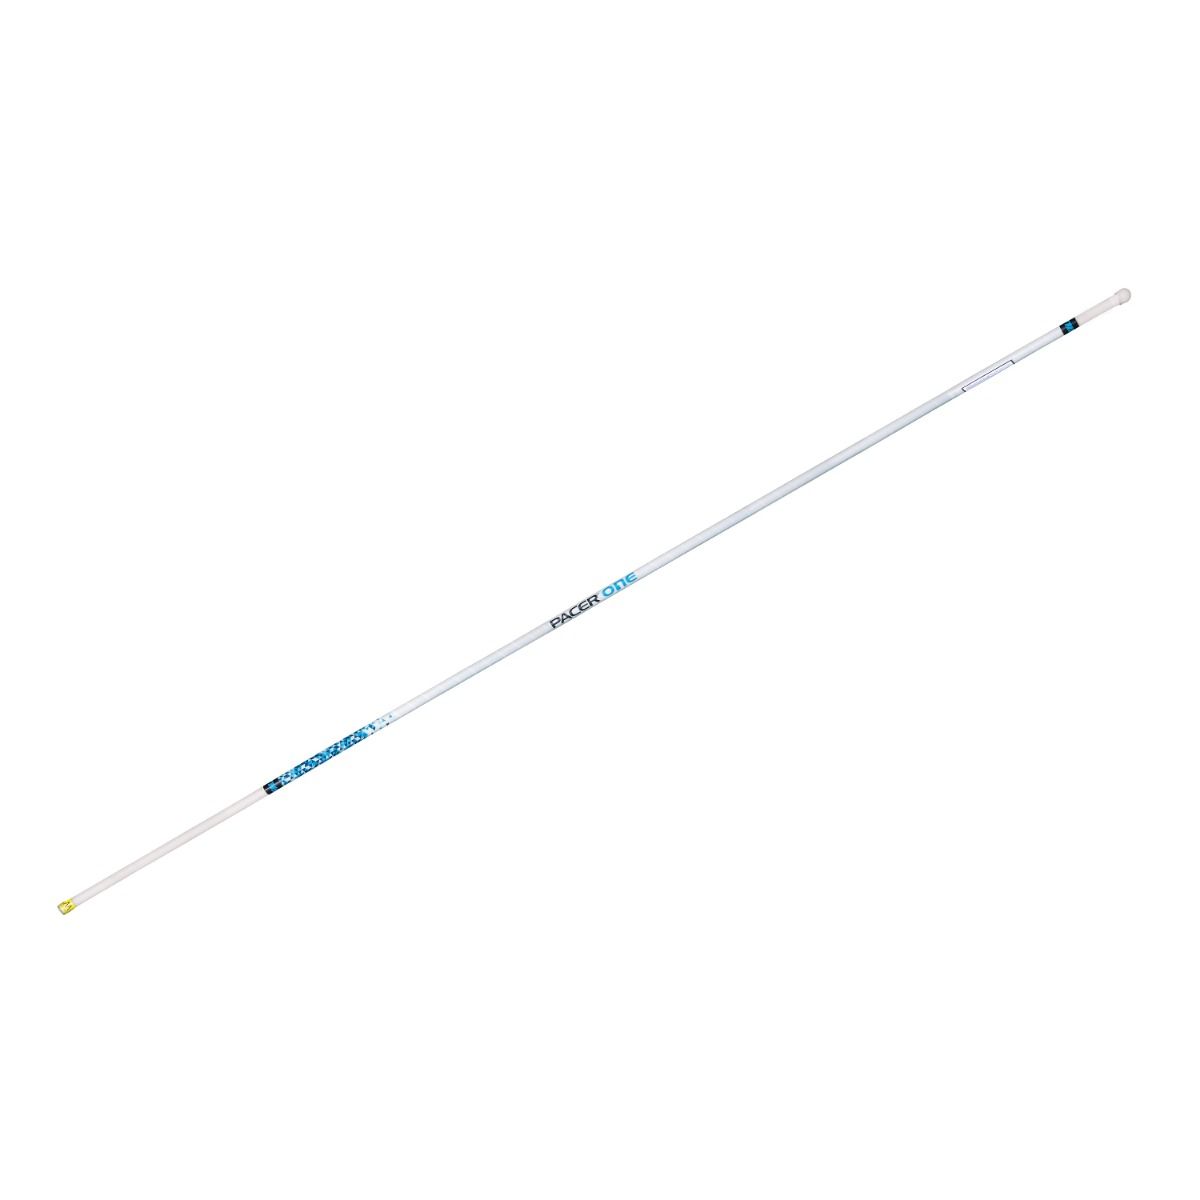 Gill 10' Pacer One Vaulting Pole